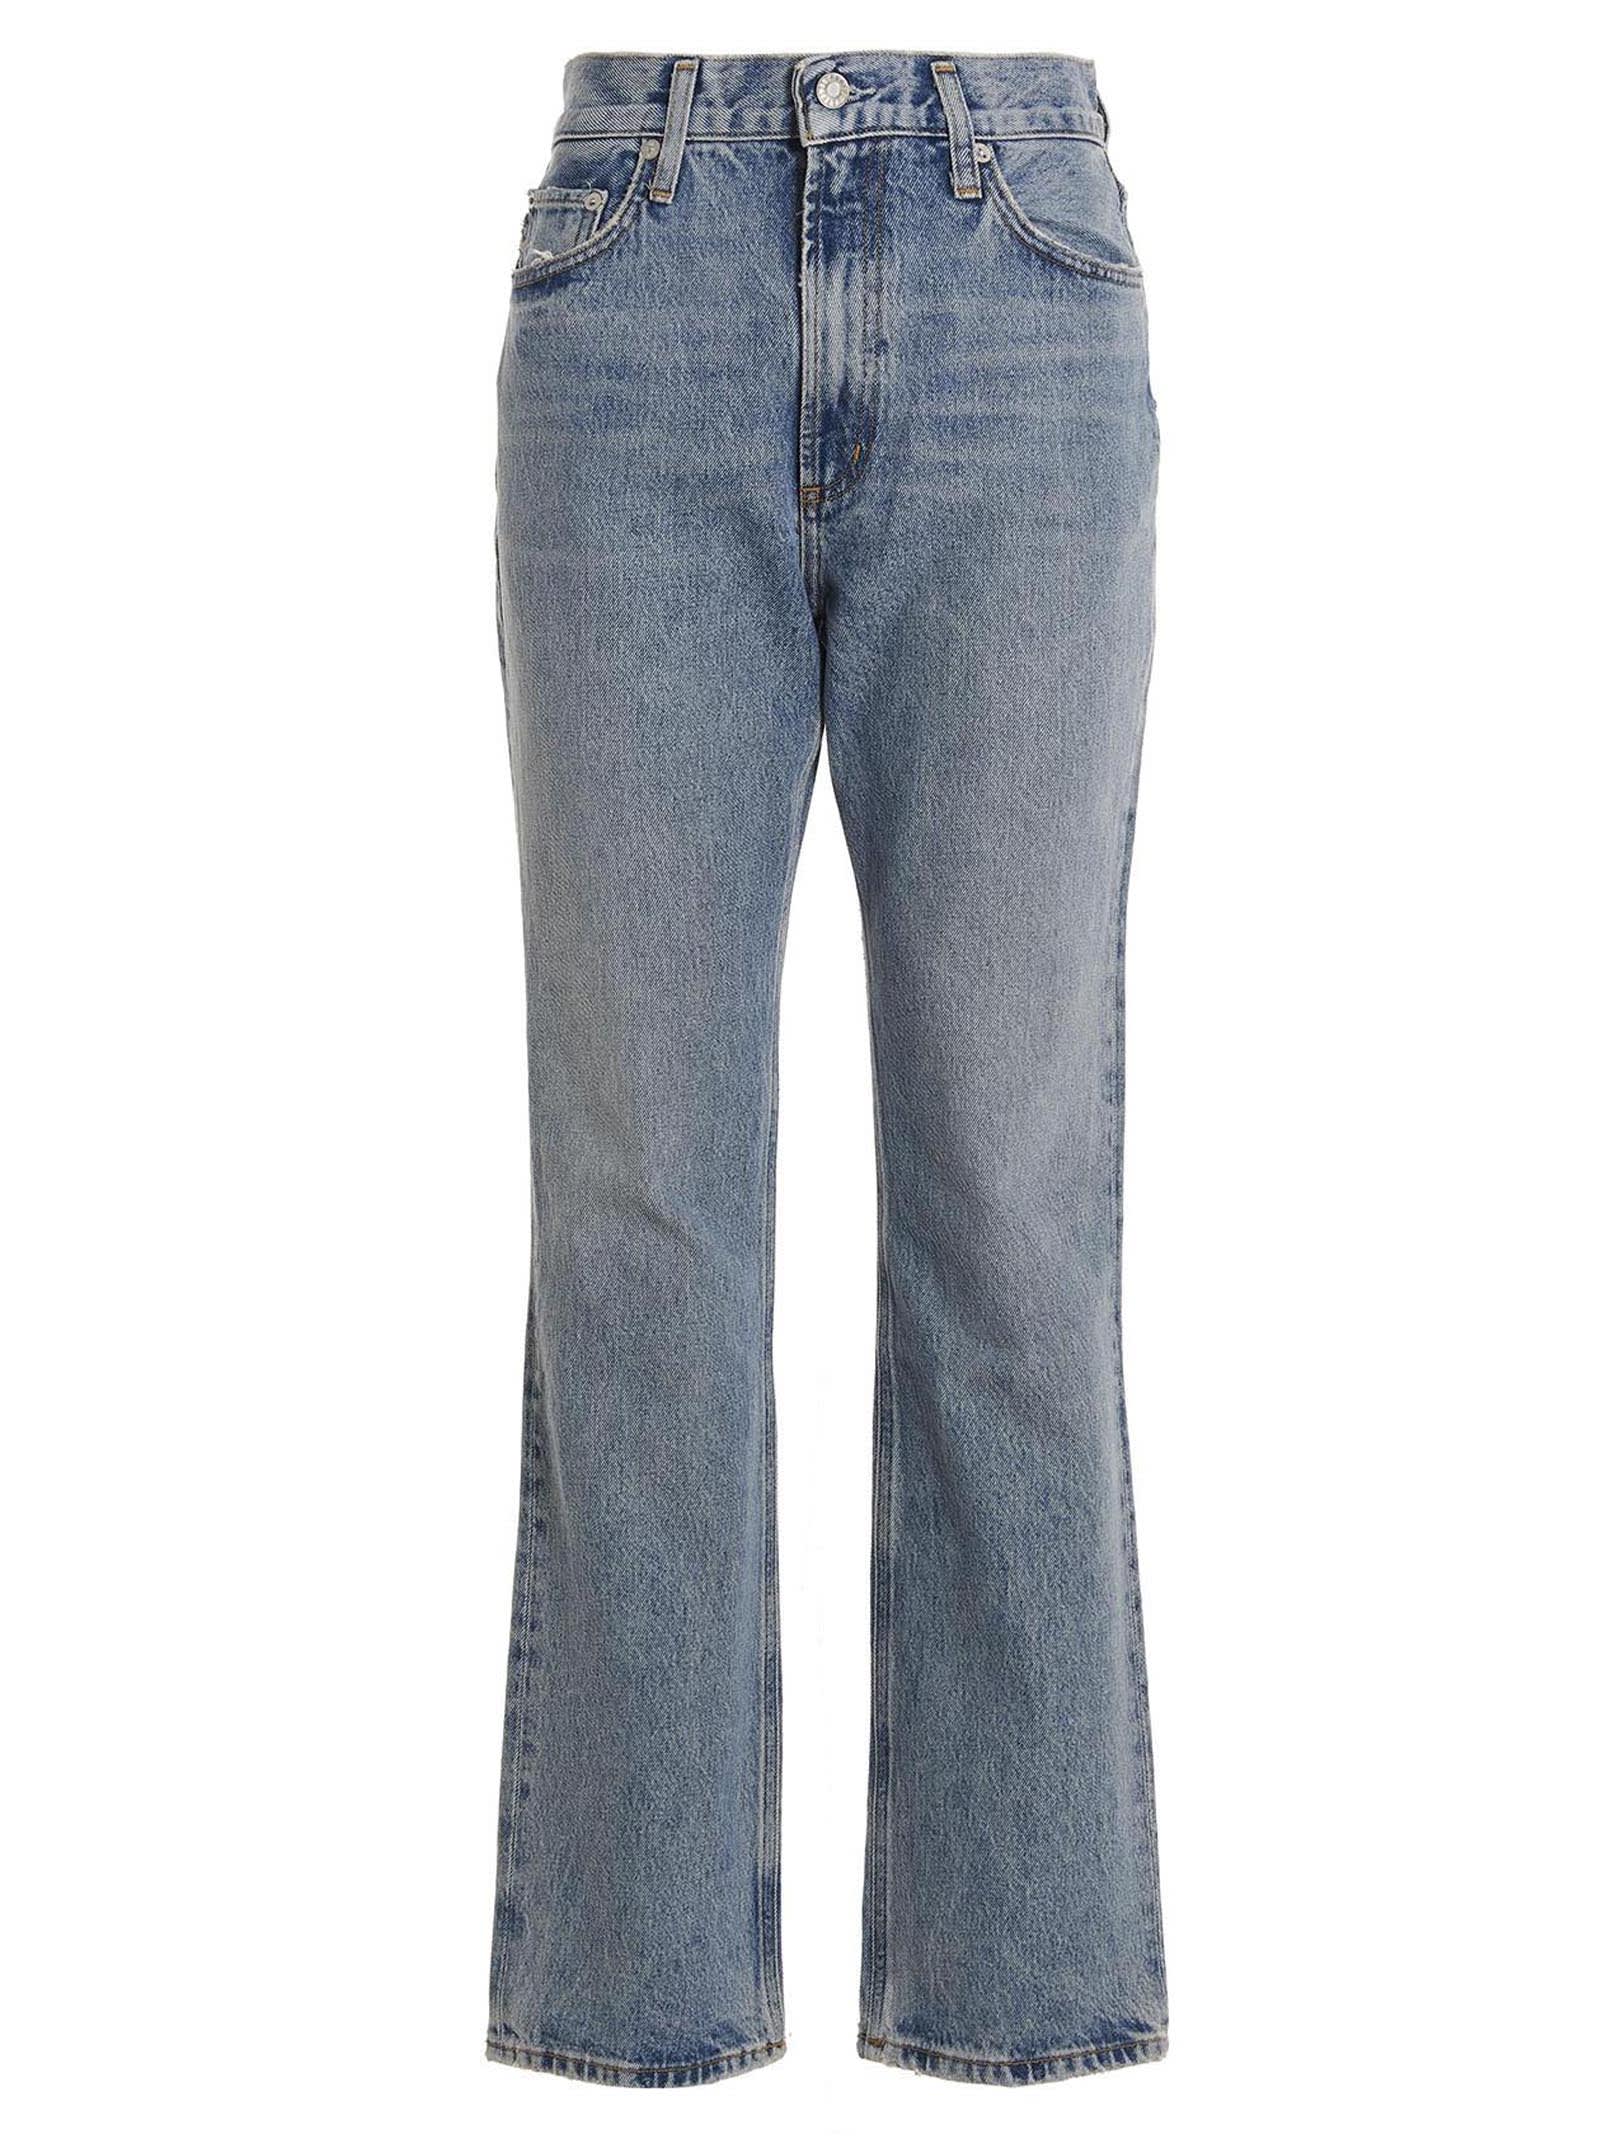 AGOLDE vintage High Rise Boot Jeans